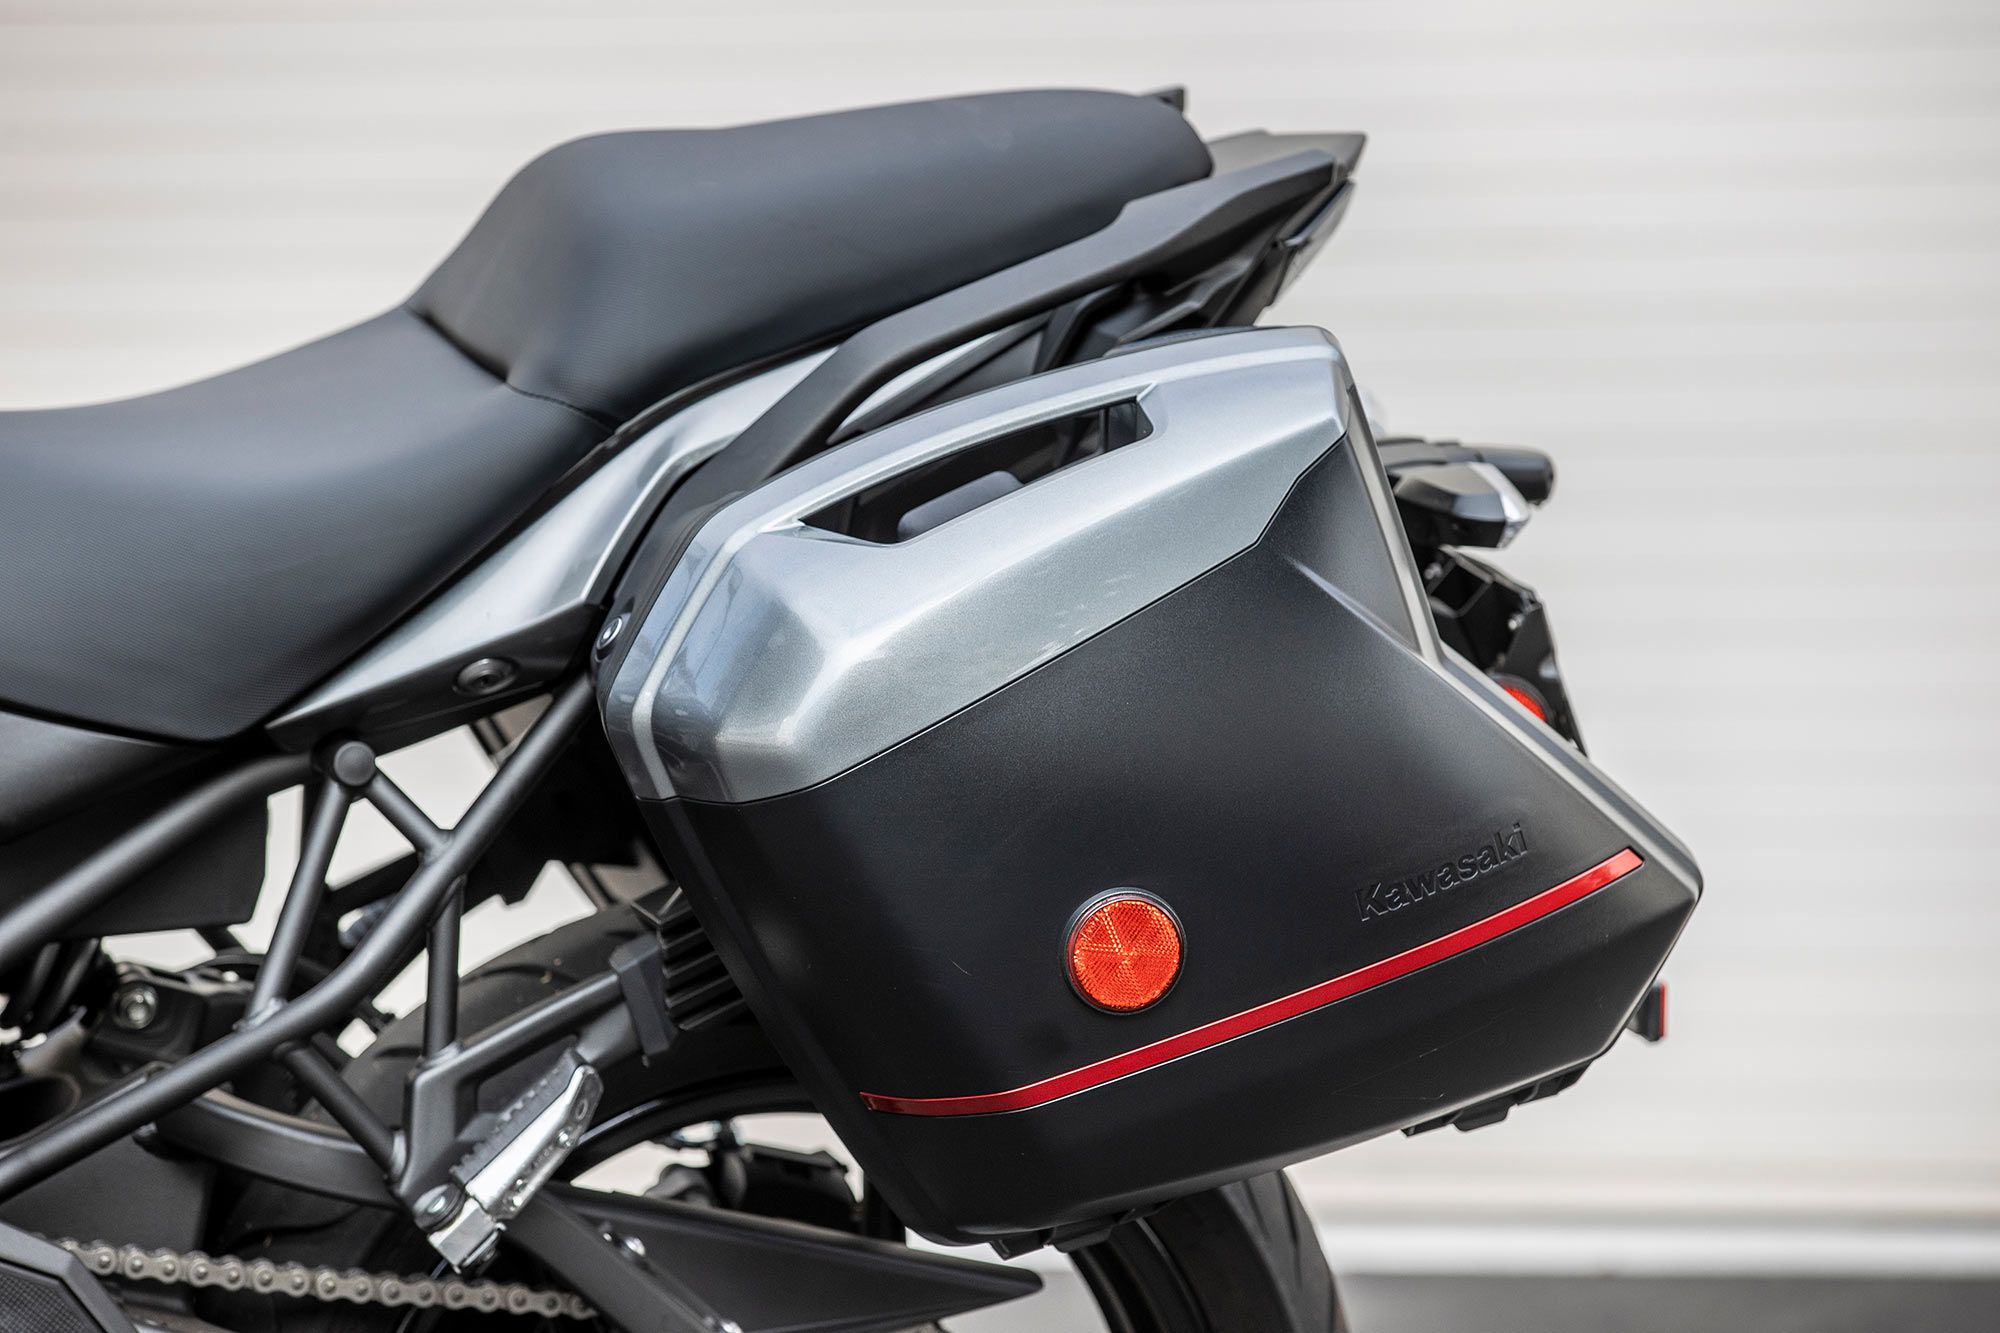 A pair of 28-liter bags also outfits the LT model. Kawasaki’s hard saddlebags have always been known for their quality construction and ease of use.